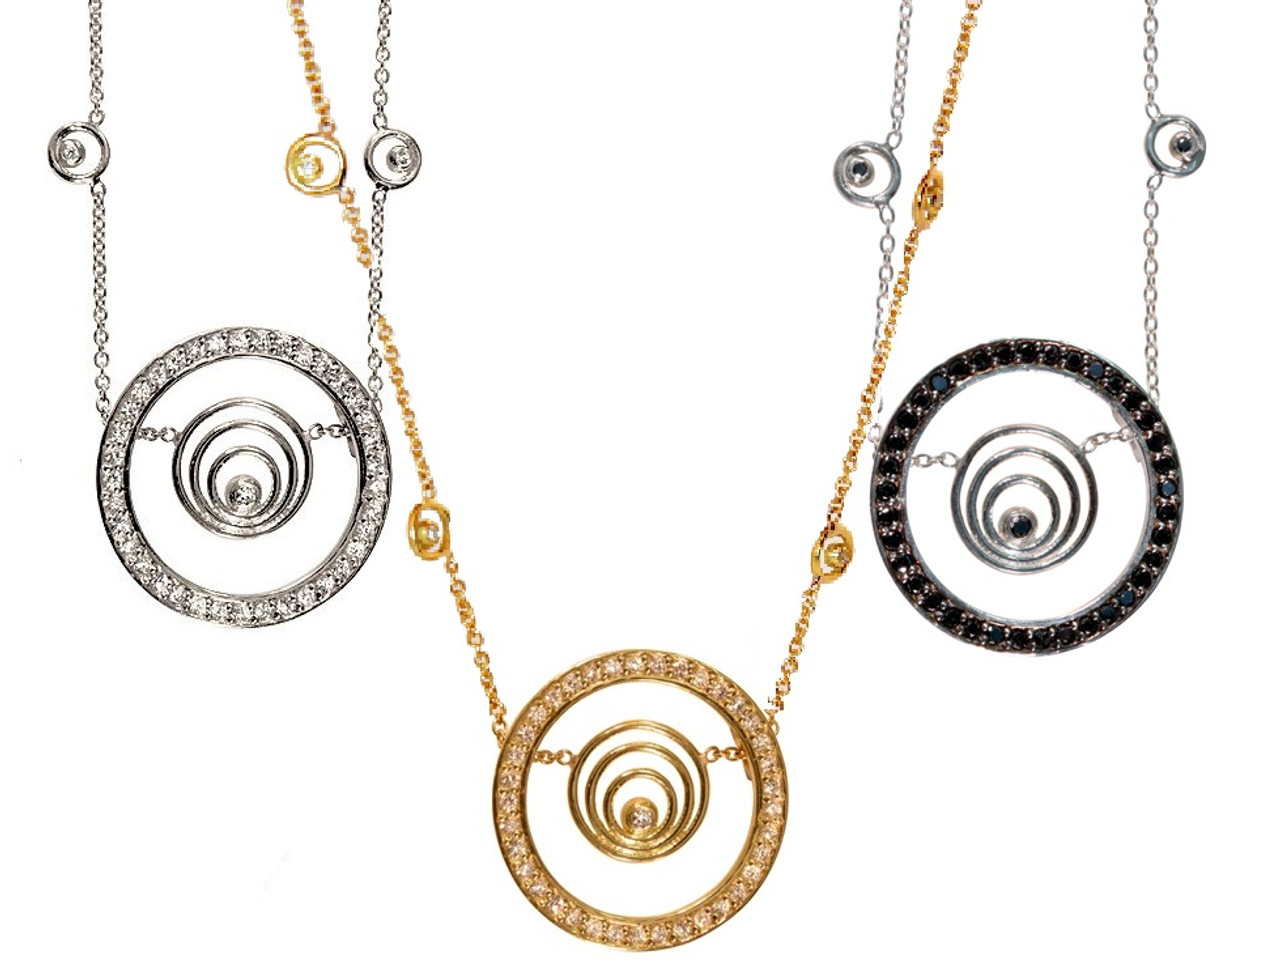 Karma hoop necklace- large- sterling silver with black diamonds